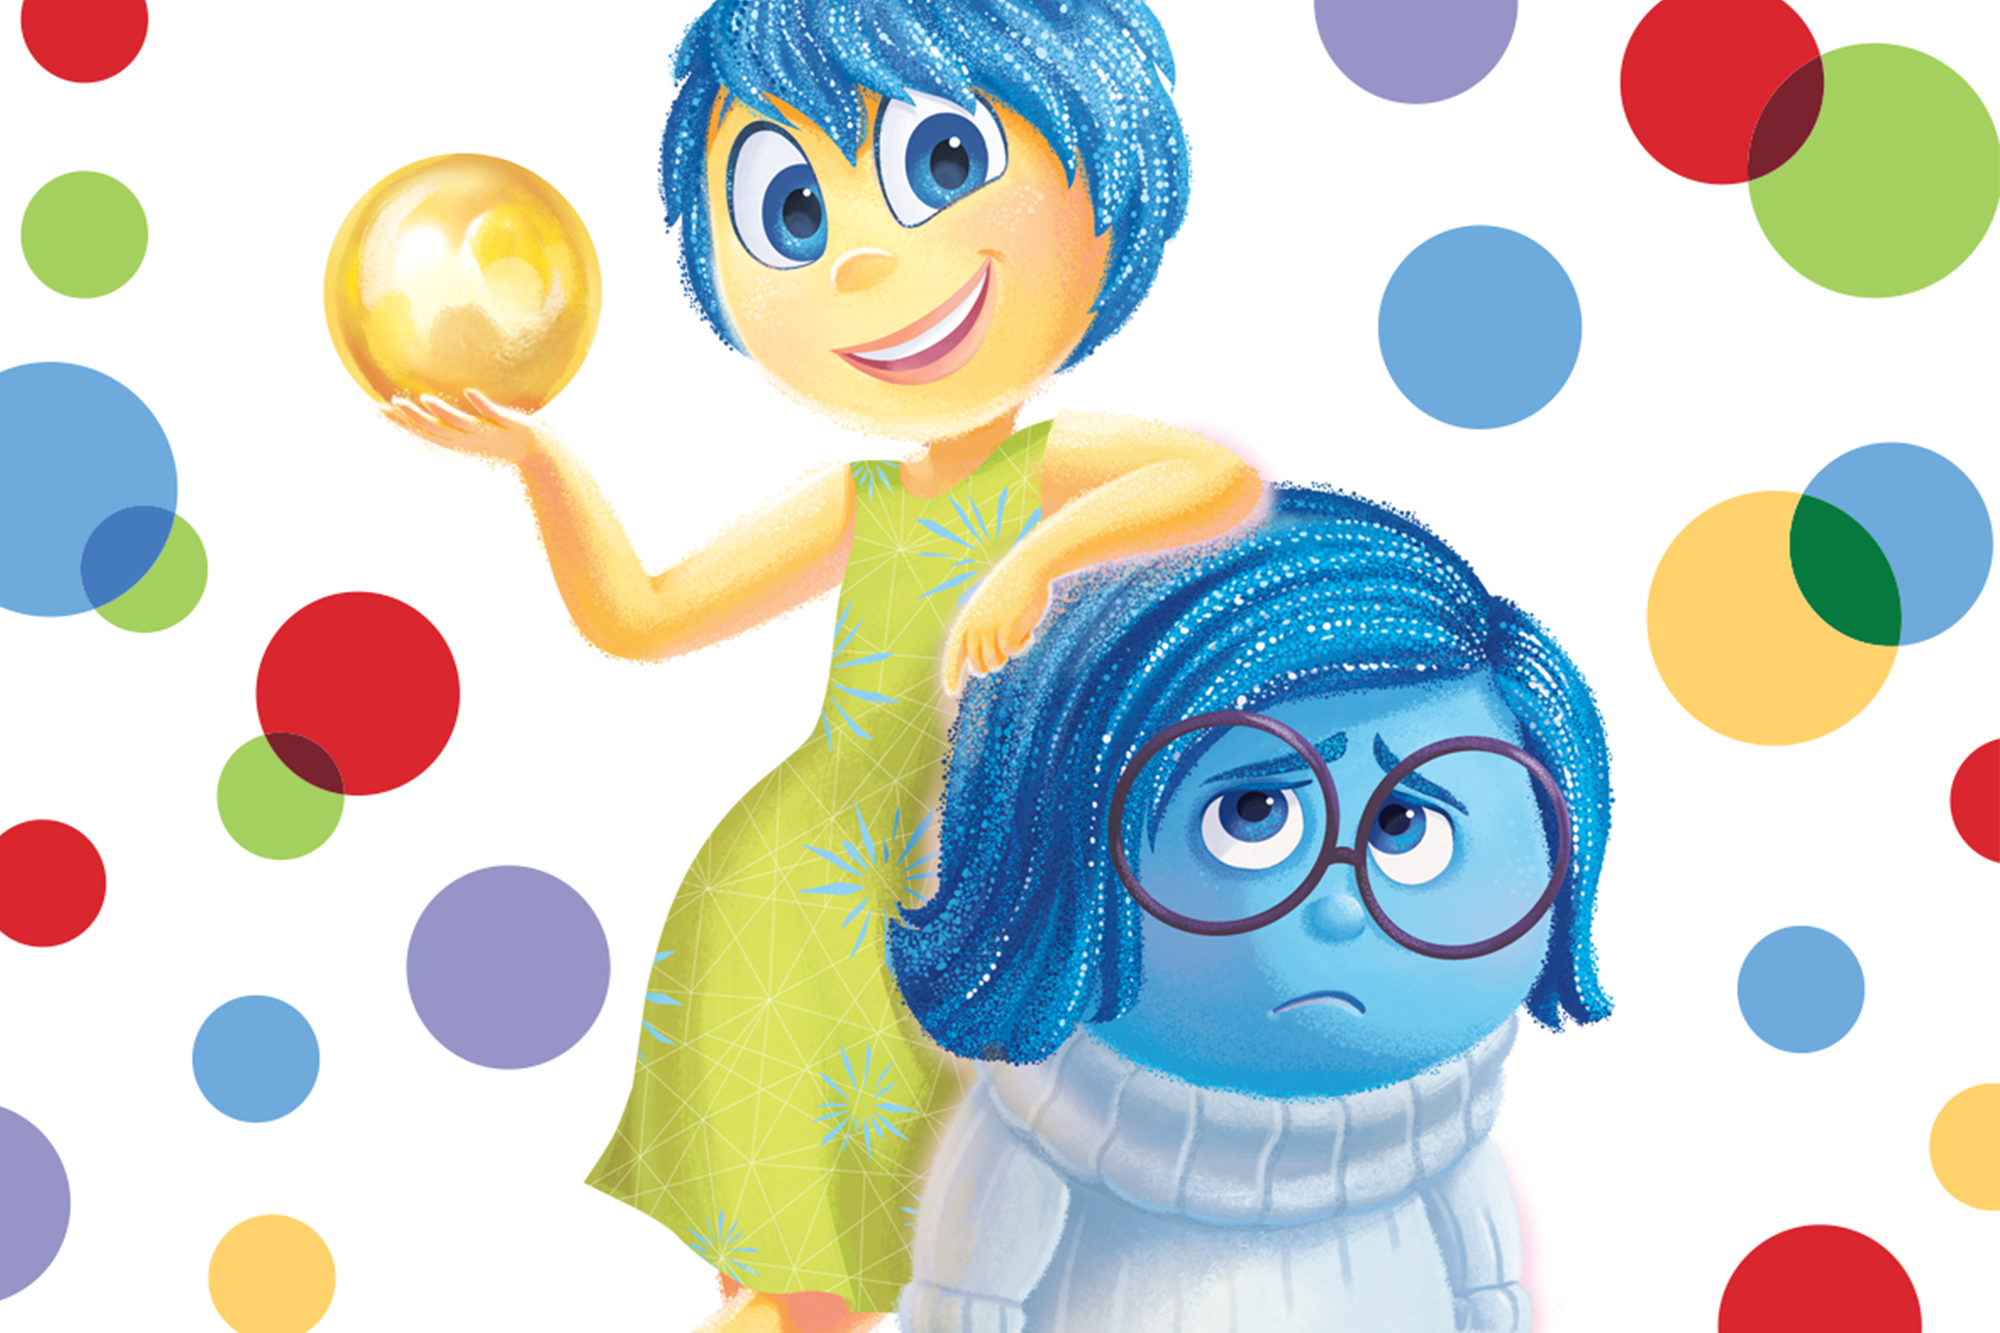 Sadness and Joy from Disney Pixar inside out